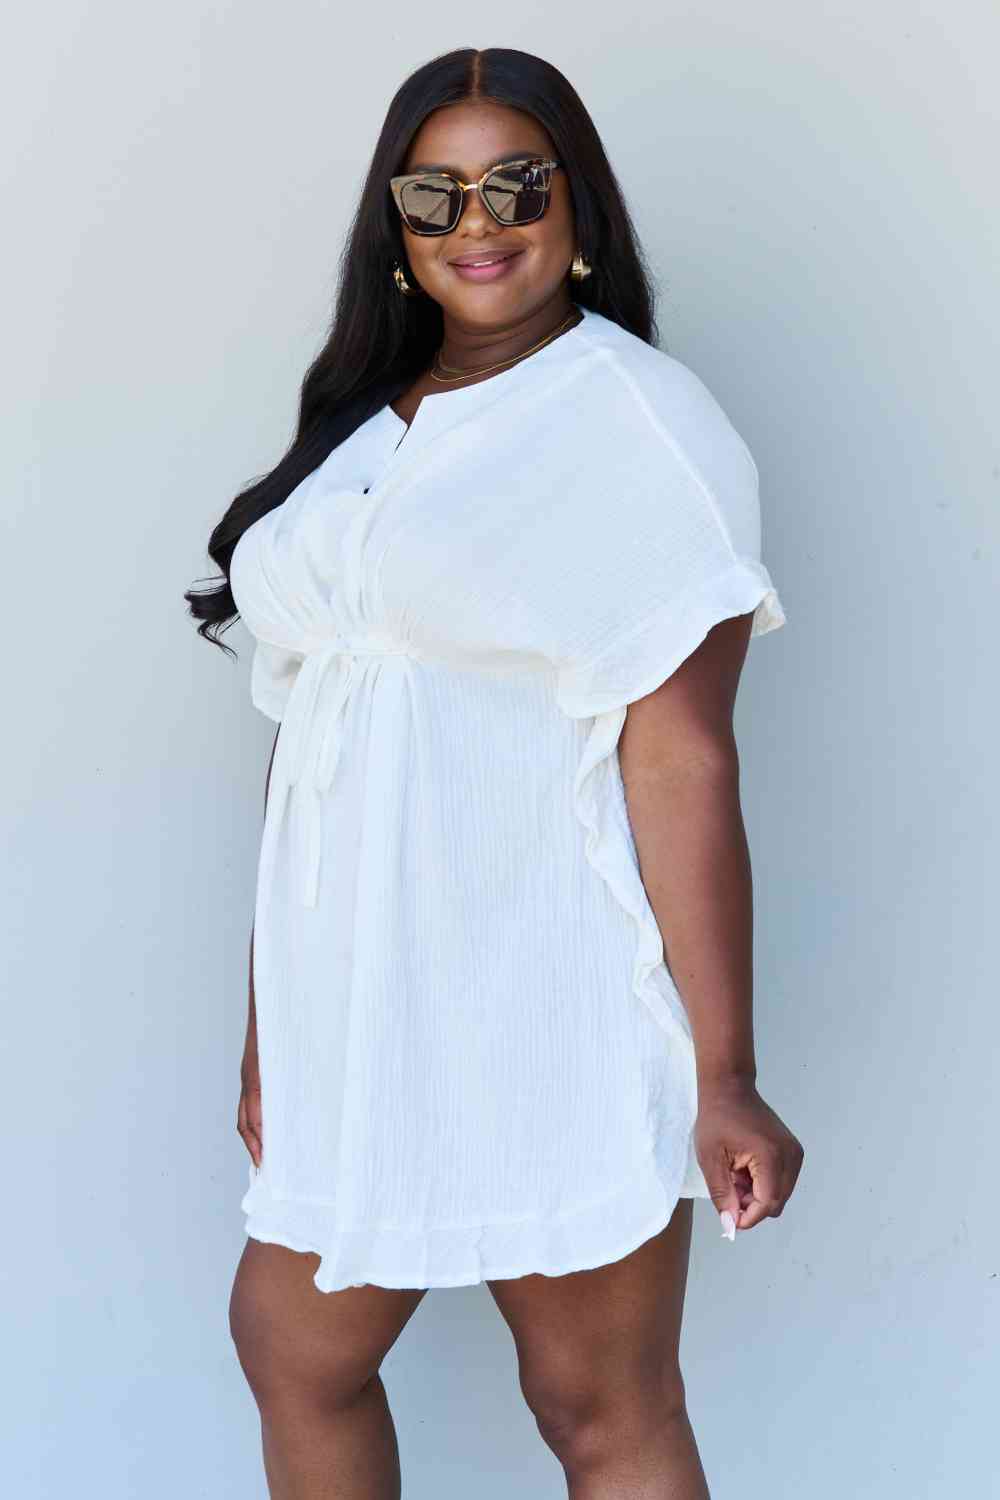 Ninexis Out Of Time Full Size Ruffle Hem Dress with Drawstring Waistband in White Print on any thing USA/STOD clothes